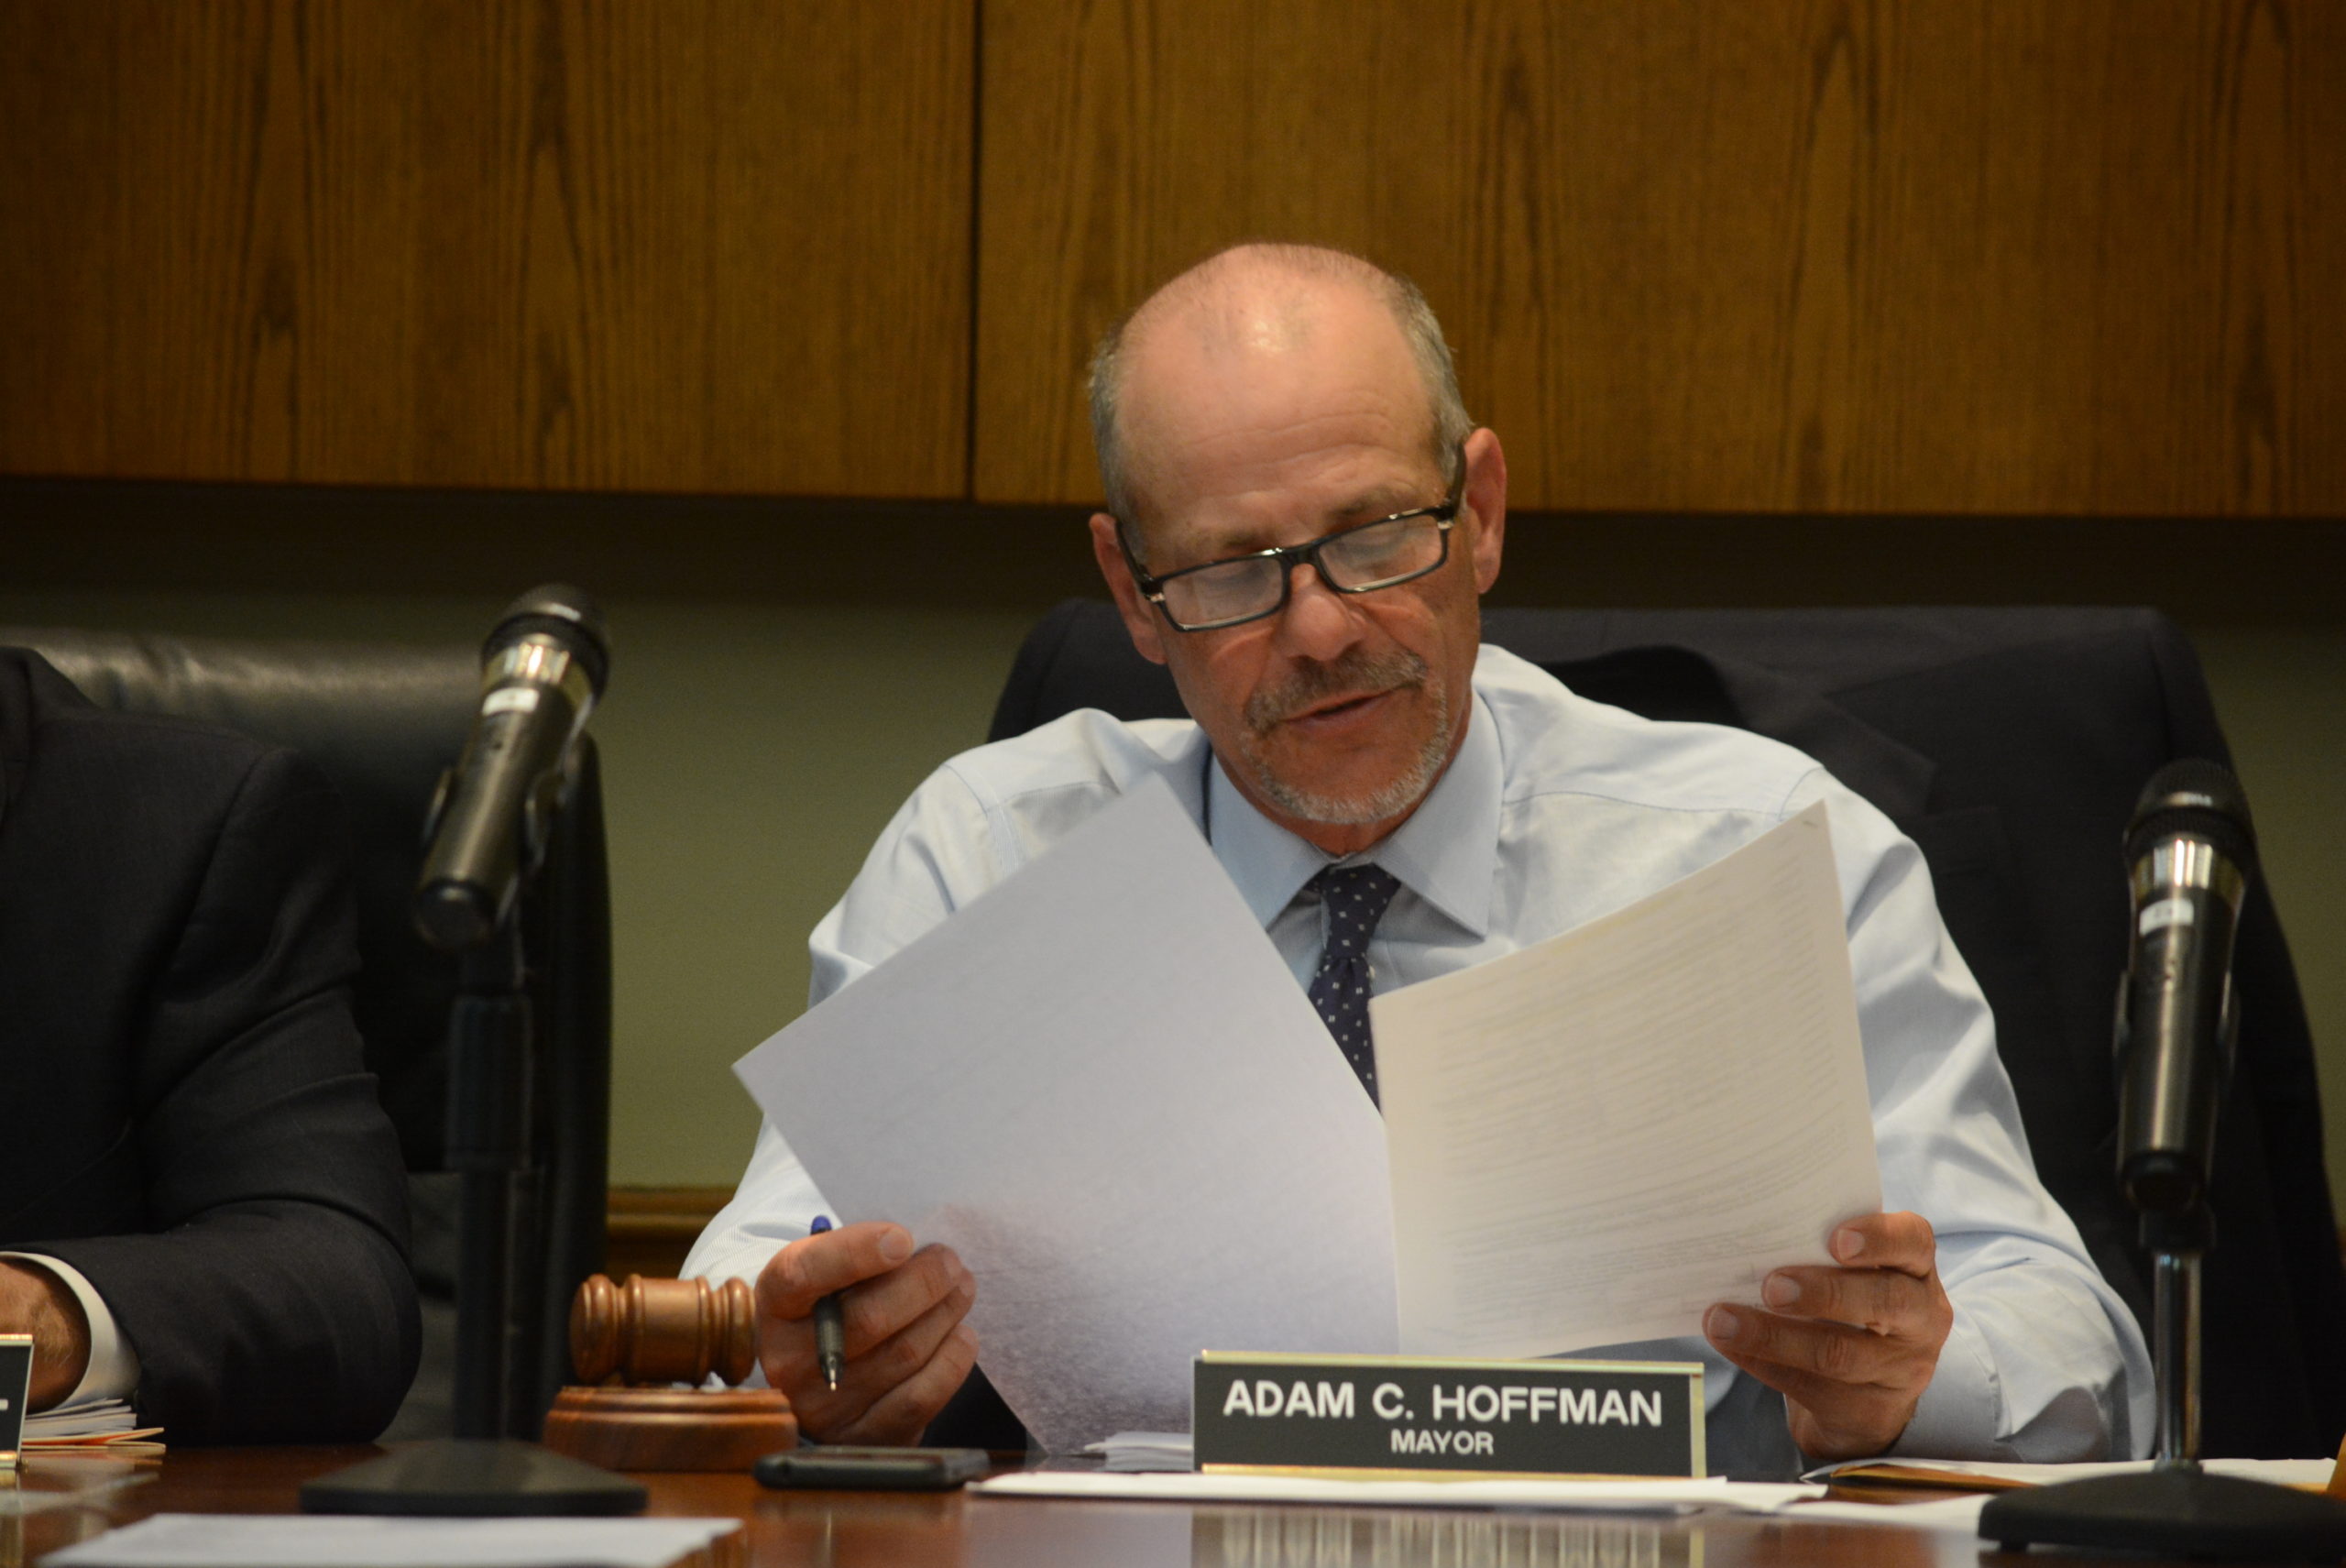 Mayor Adam Hoffman reviews a set of documents during Monday night's board meeting. (Photo by Janelle Clausen)